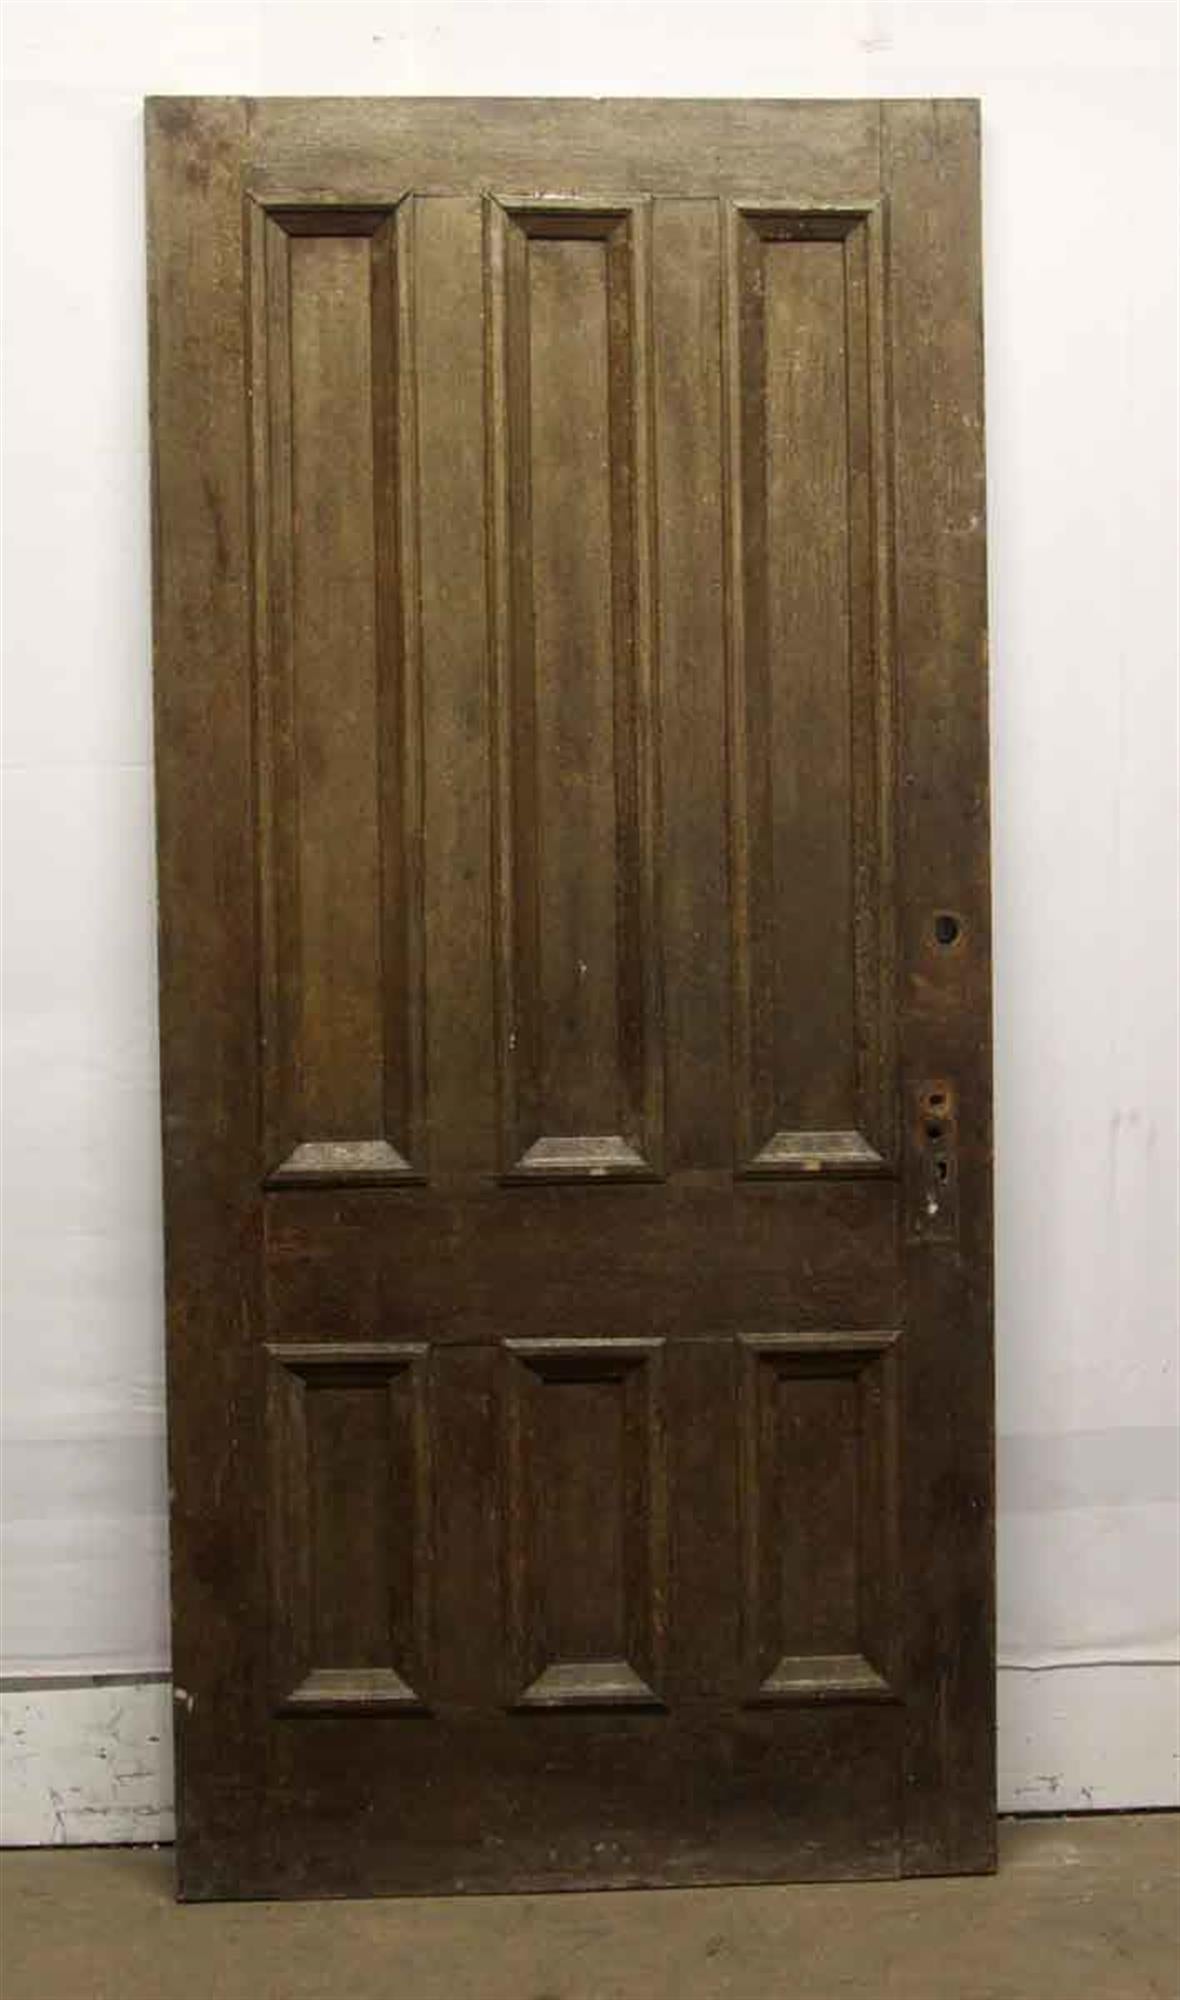 Unique dark wood tone privacy door made of chestnut with six vertical panels from the 1920s. This can be seen at our 400 Gilligan St location in Scranton, PA. 